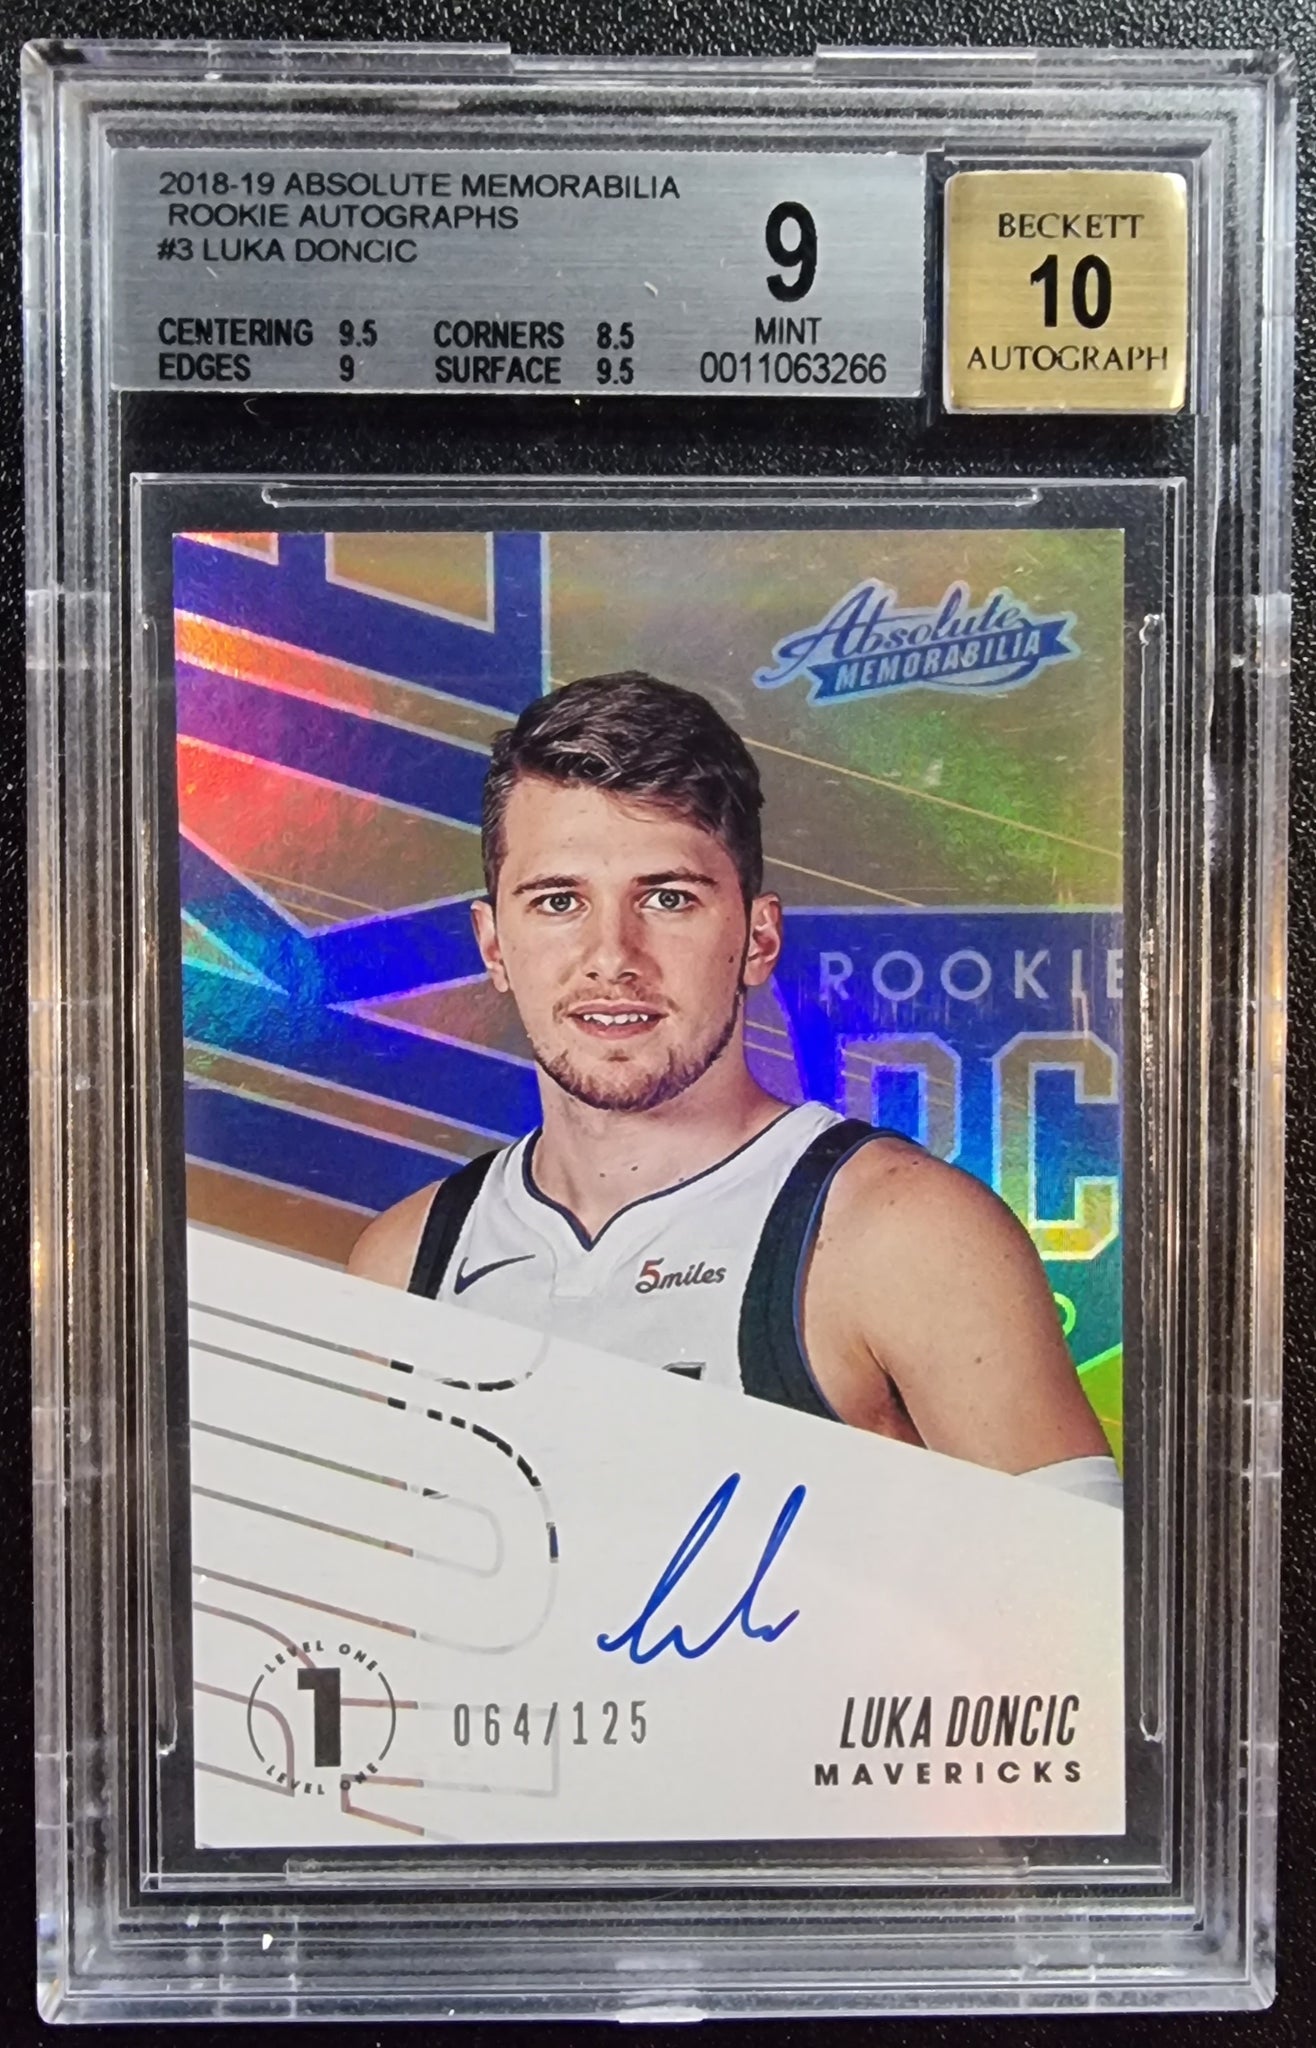 BGS9 2018-19 Prizm Silver Luka Doncic RC - その他